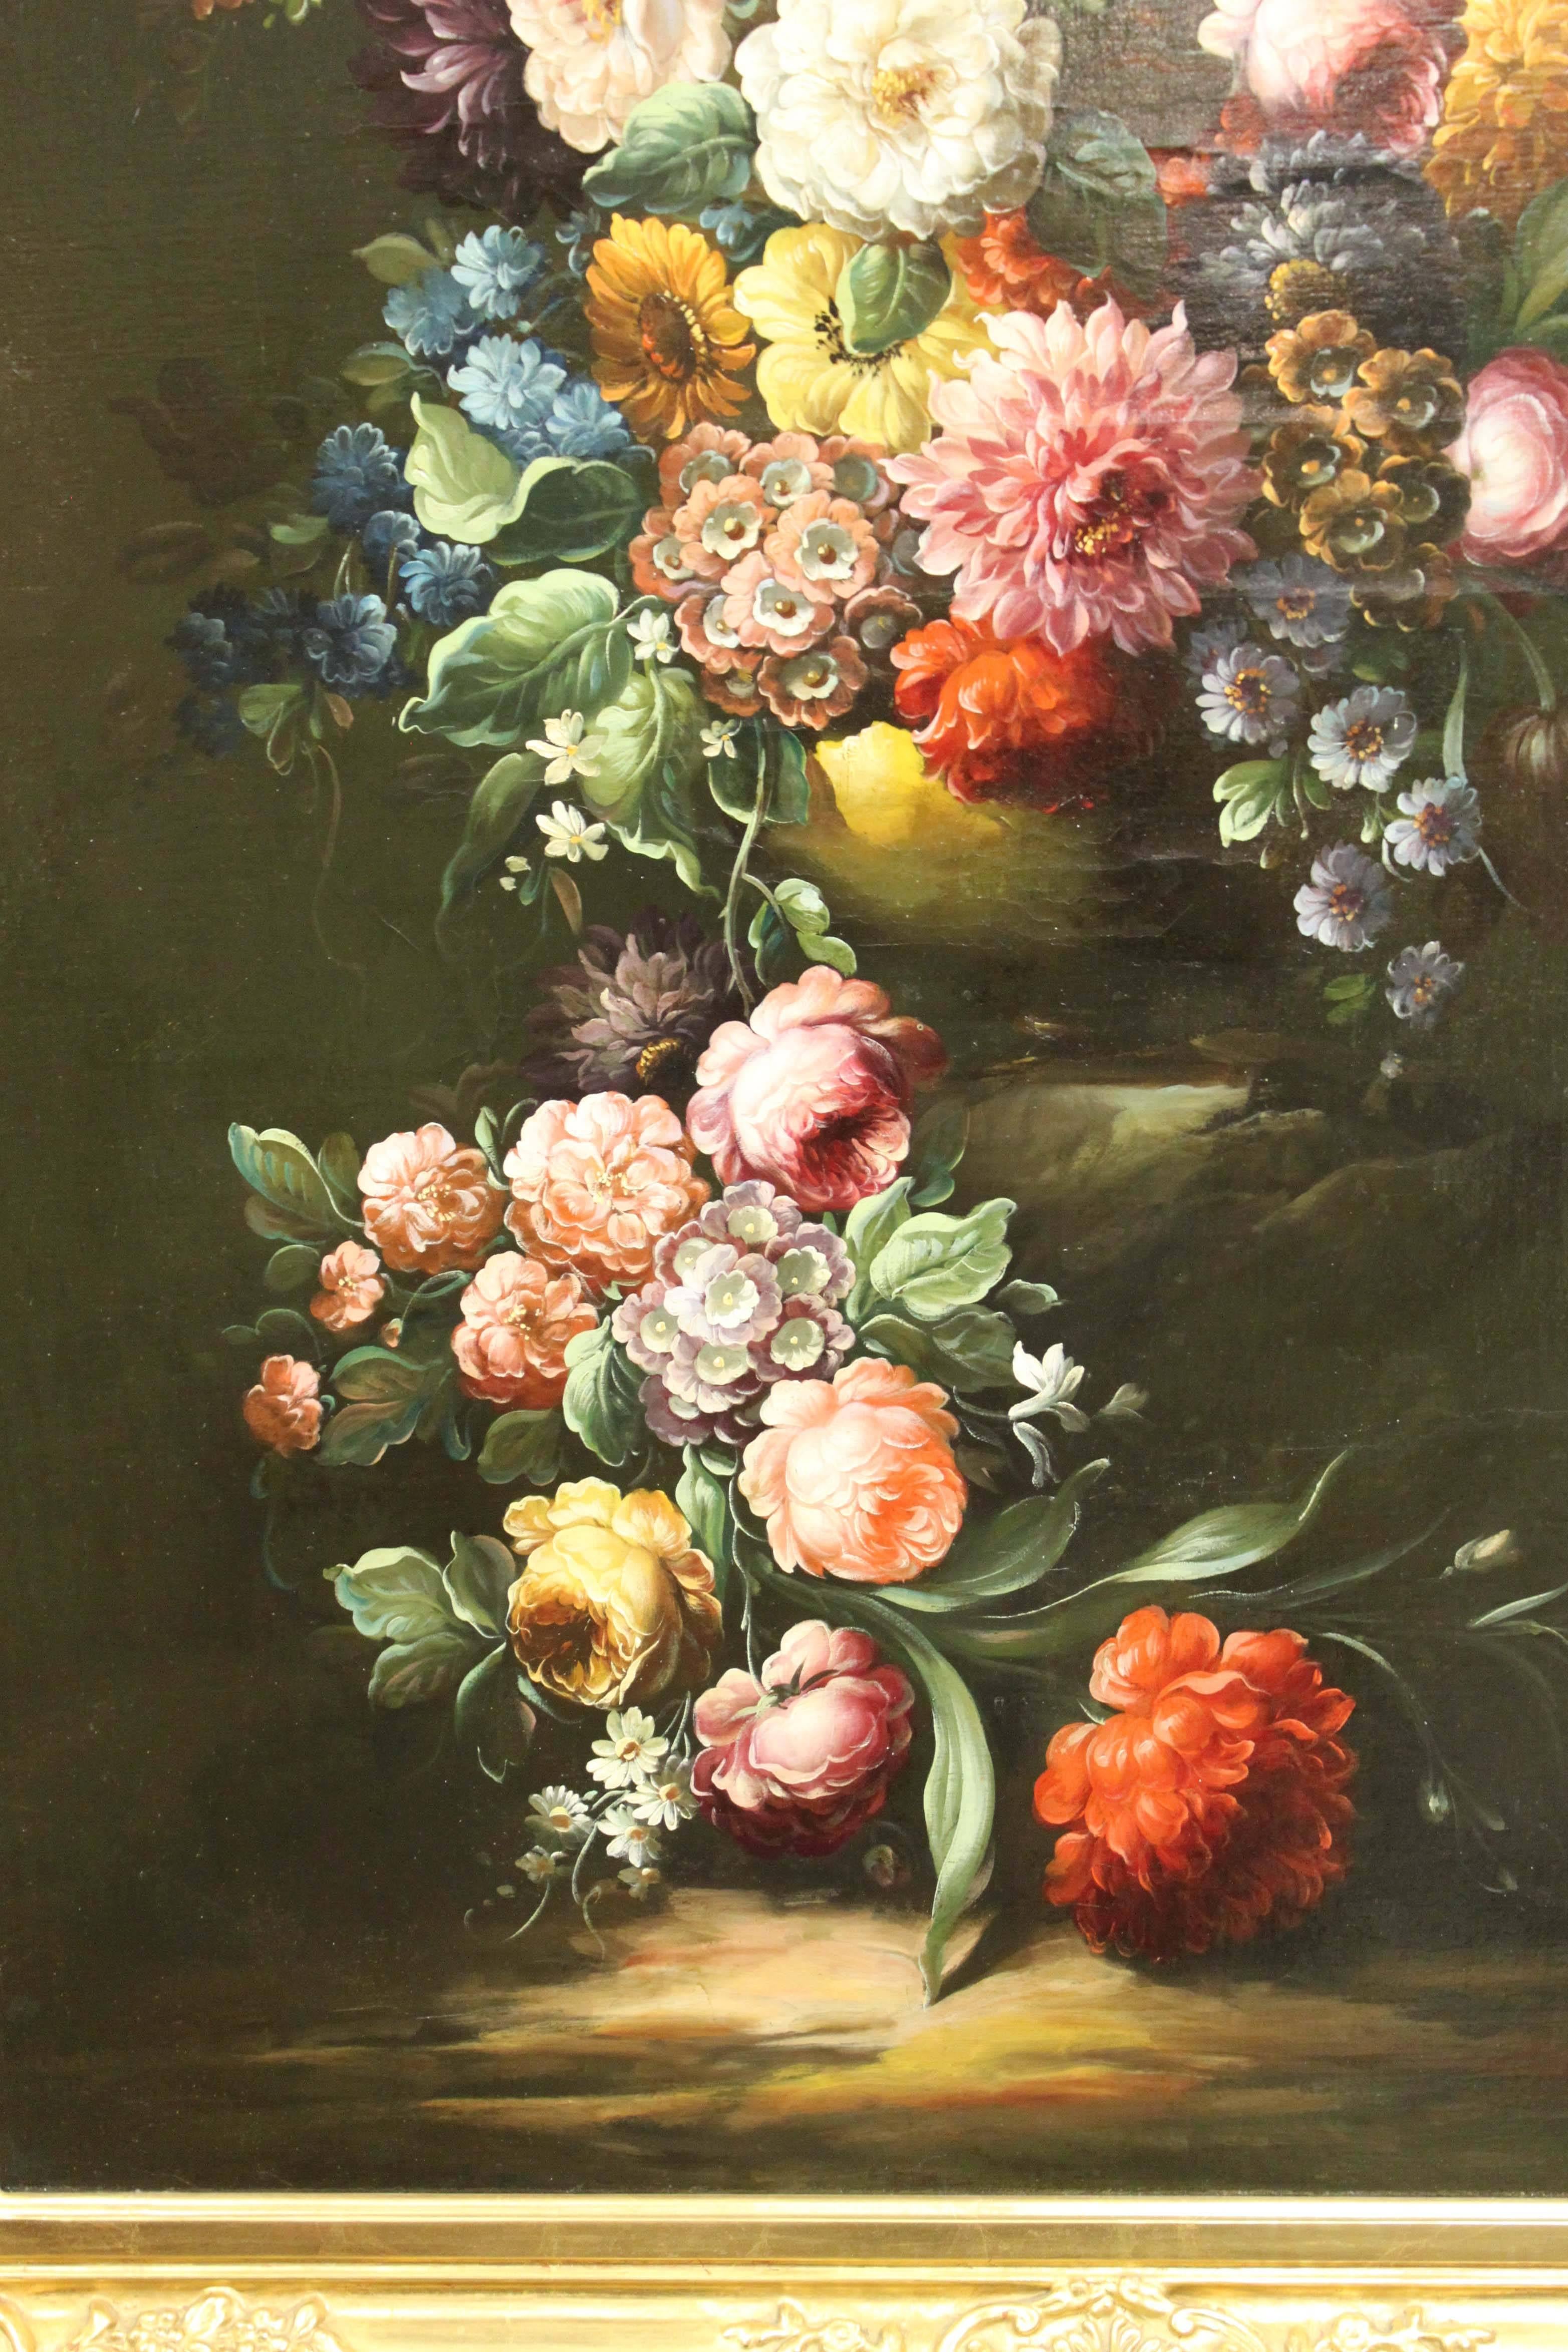 'Still Life’ 19th century German school, circle of Ernst Albert Fischer (1853-1932).
A large and vibrant still life painting attributed to this German artist. It features Dahlias, Carnations, Tulips, Primula, Peonies, Roses & Zinnia in a wooded